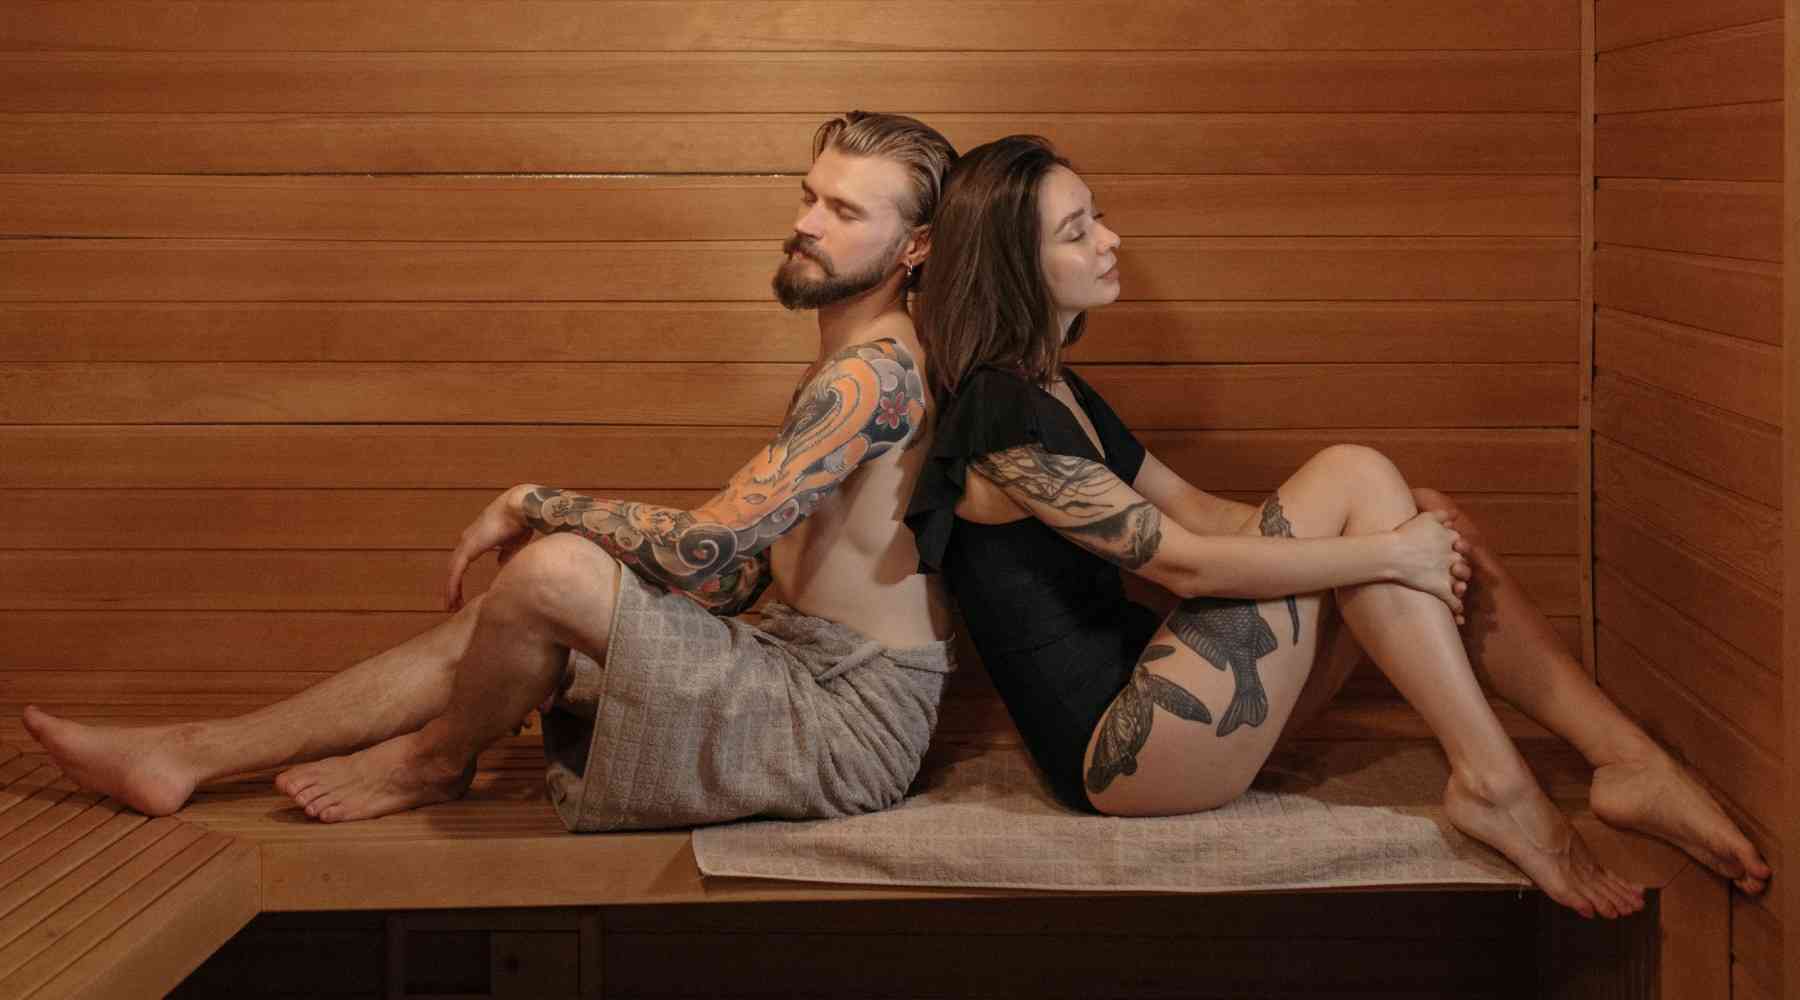 Best of Cheating in the sauna